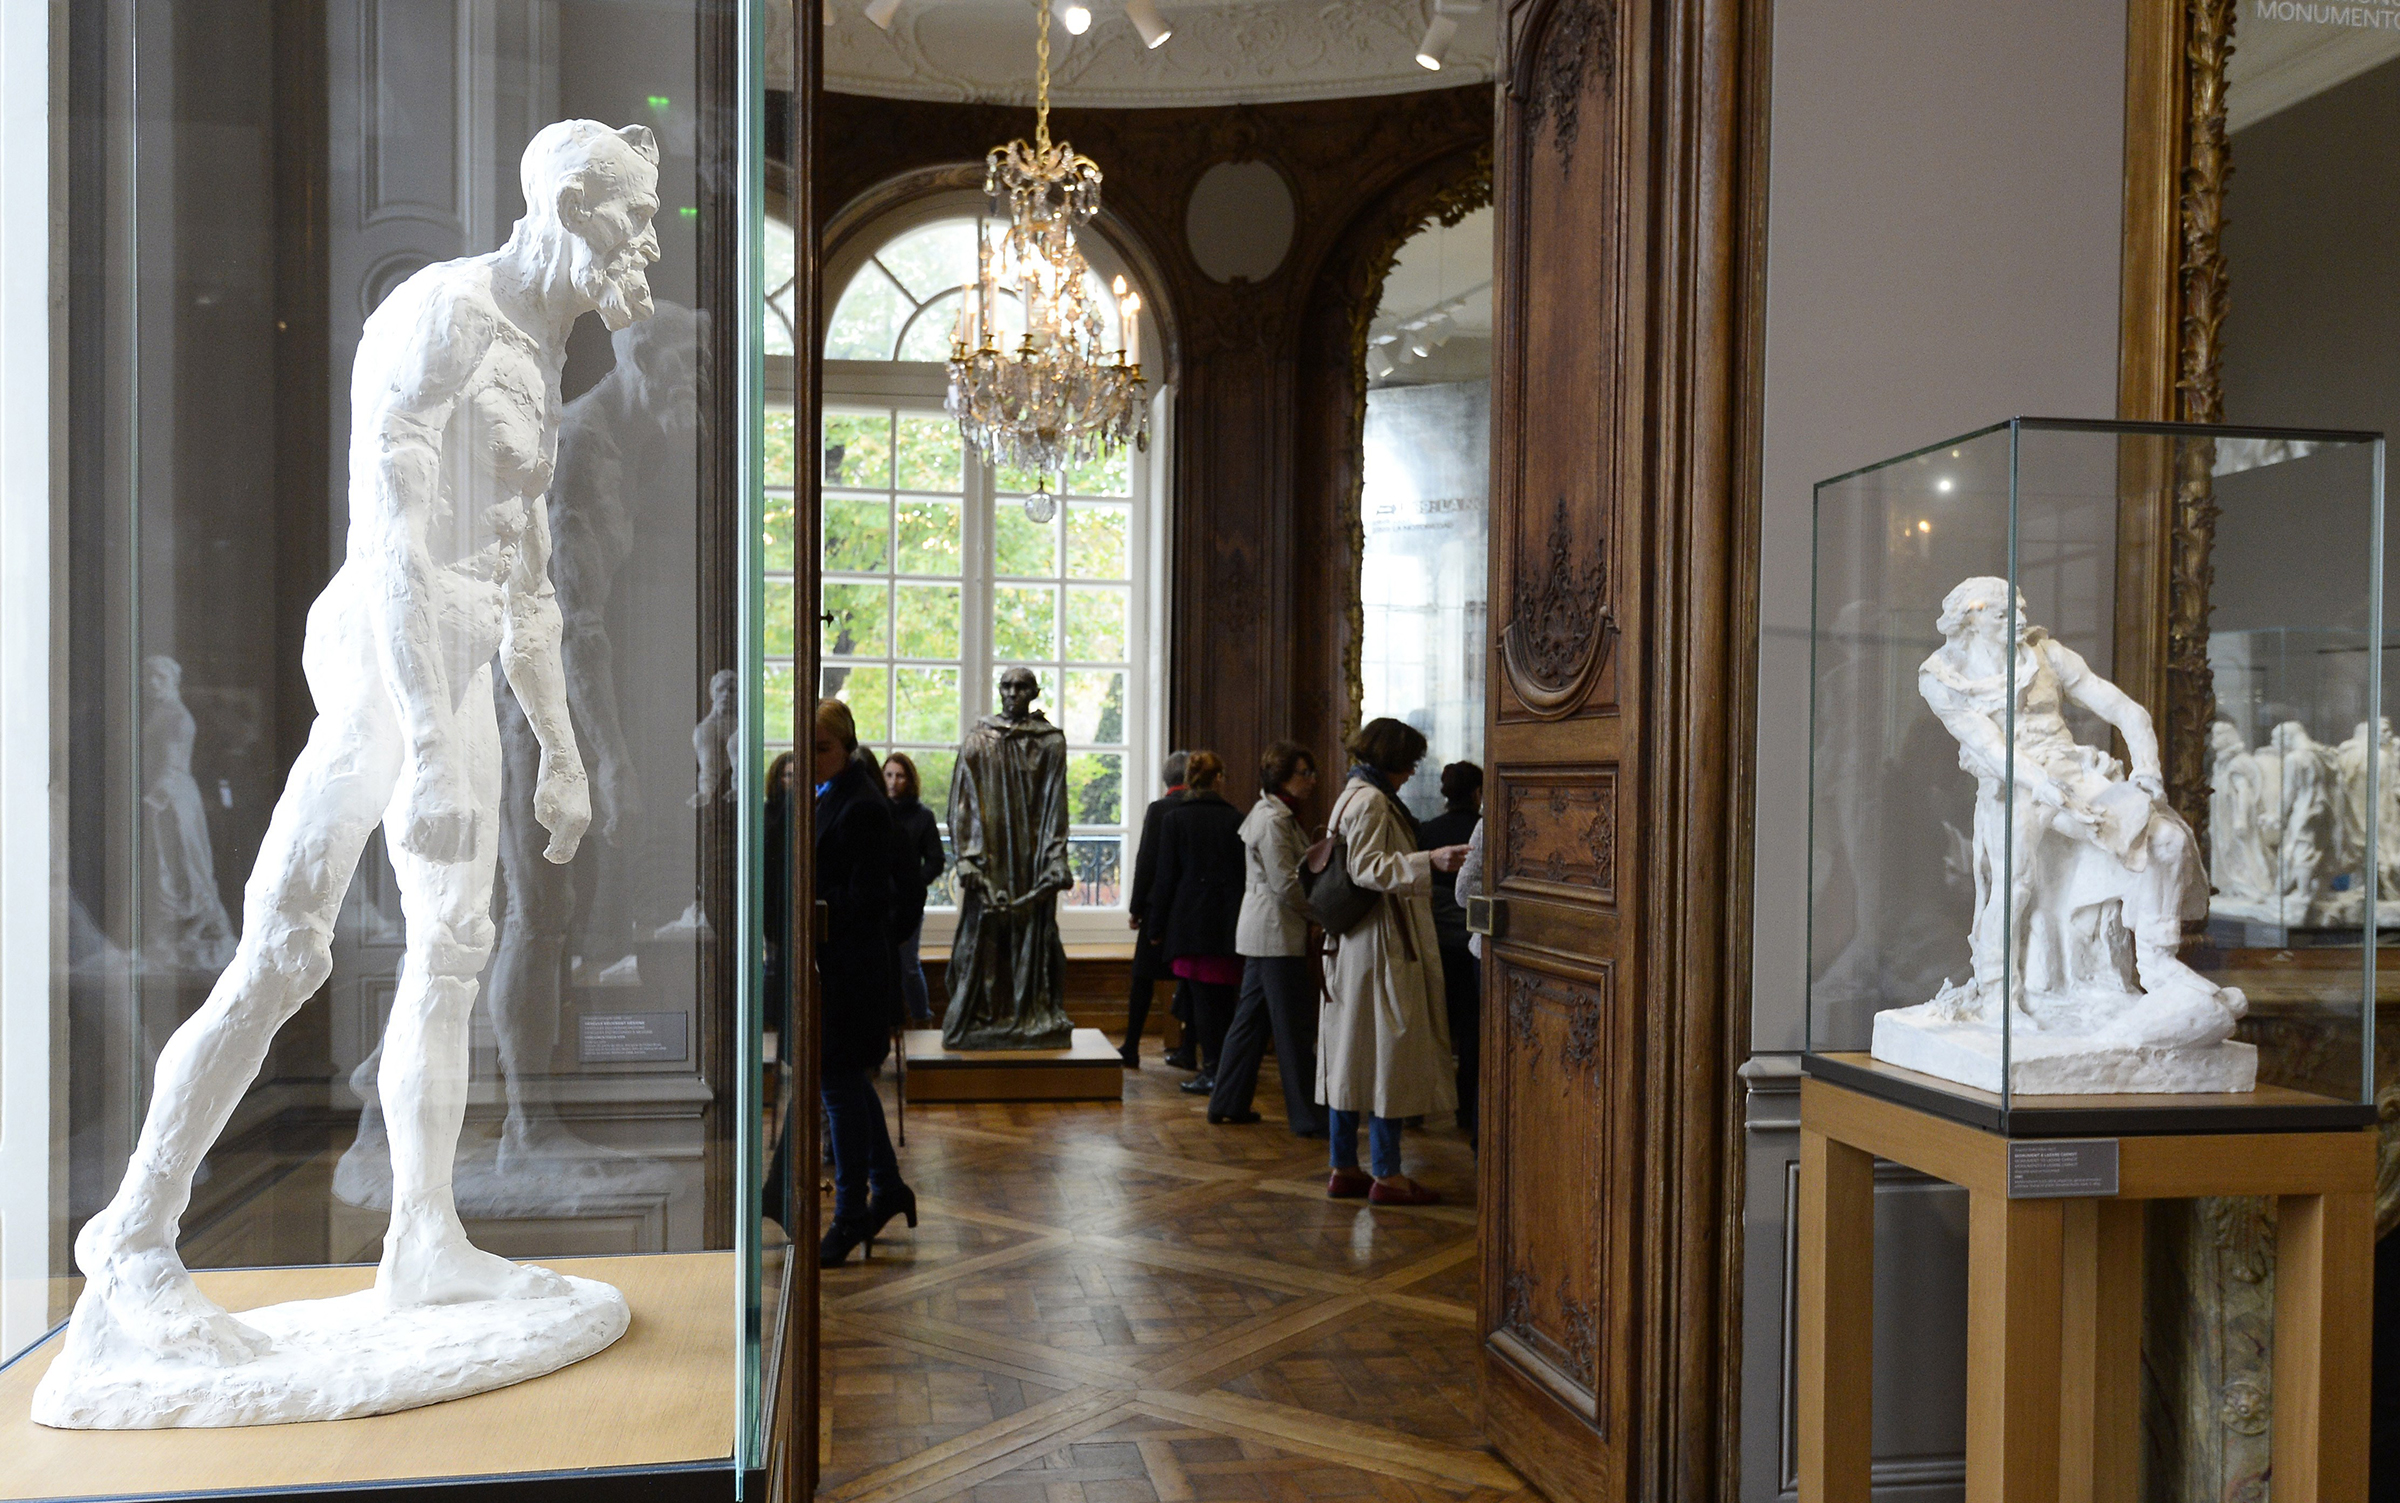 Hotel Biron Musee Rodin Paris France 48 hours in Paris